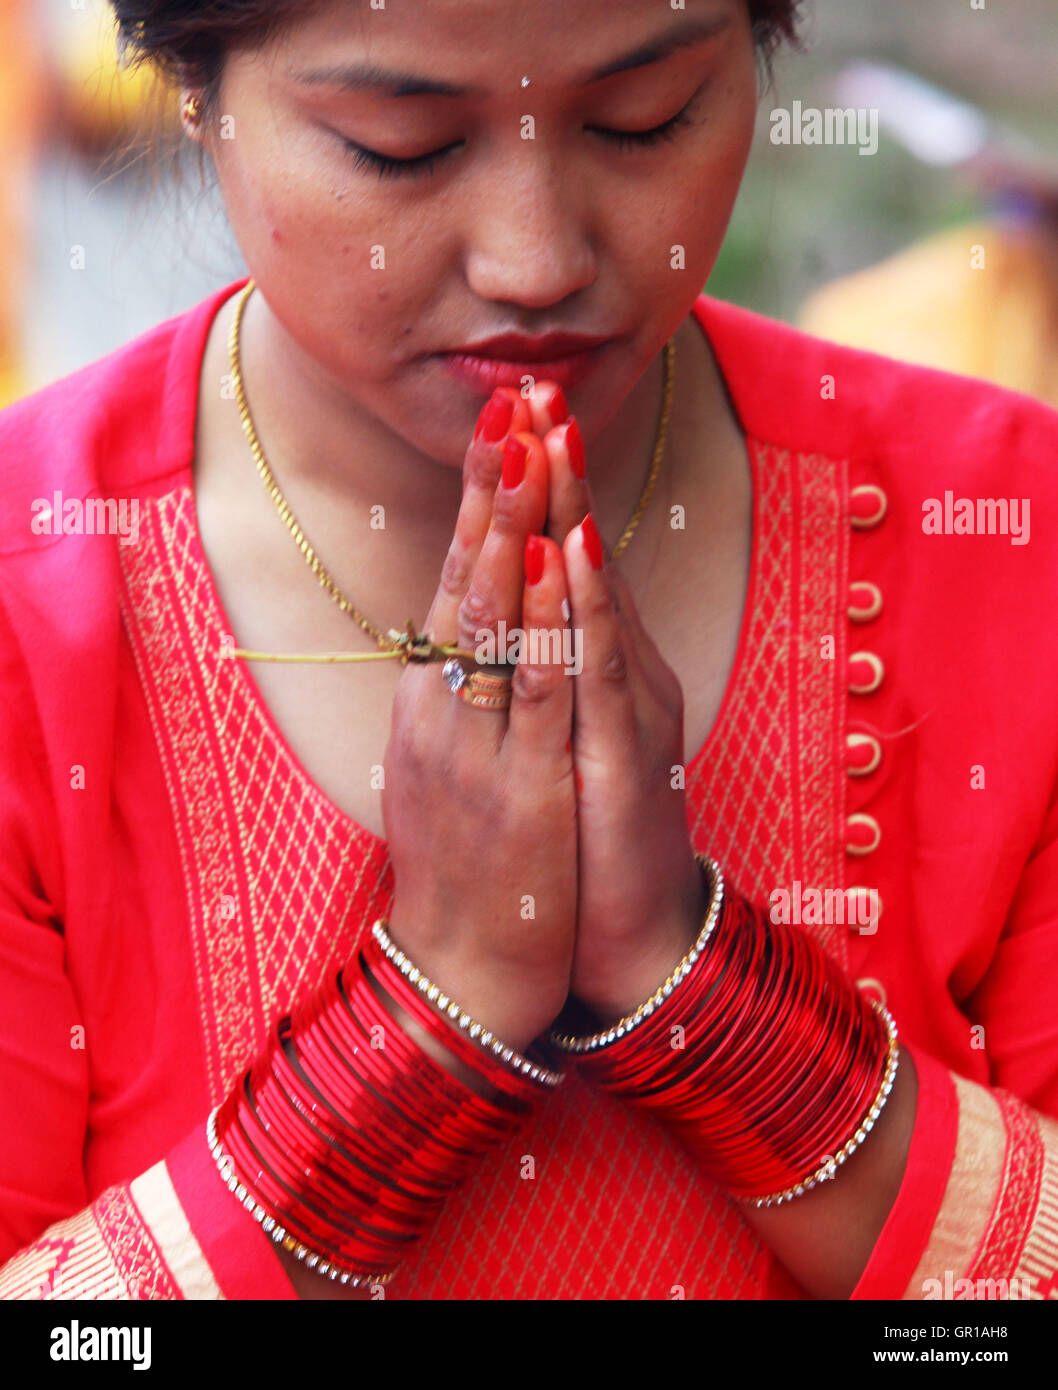 Kathmandu, Nepal. 6th Sep, 2016. A Hindu woman offers prayers during the Rishi Panchami festival in Kathmandu, Nepal, Sept. 6, 2016. Rishi Panchami festival marks the end of the three-day Teej festival when women worship Sapta Rishi (Seven Saints) and pray for health for their husband while unmarried women wish for handsome husband and happy conjugal lives. © Sunil Sharma/Xinhua/Alamy Live News Stock Photo